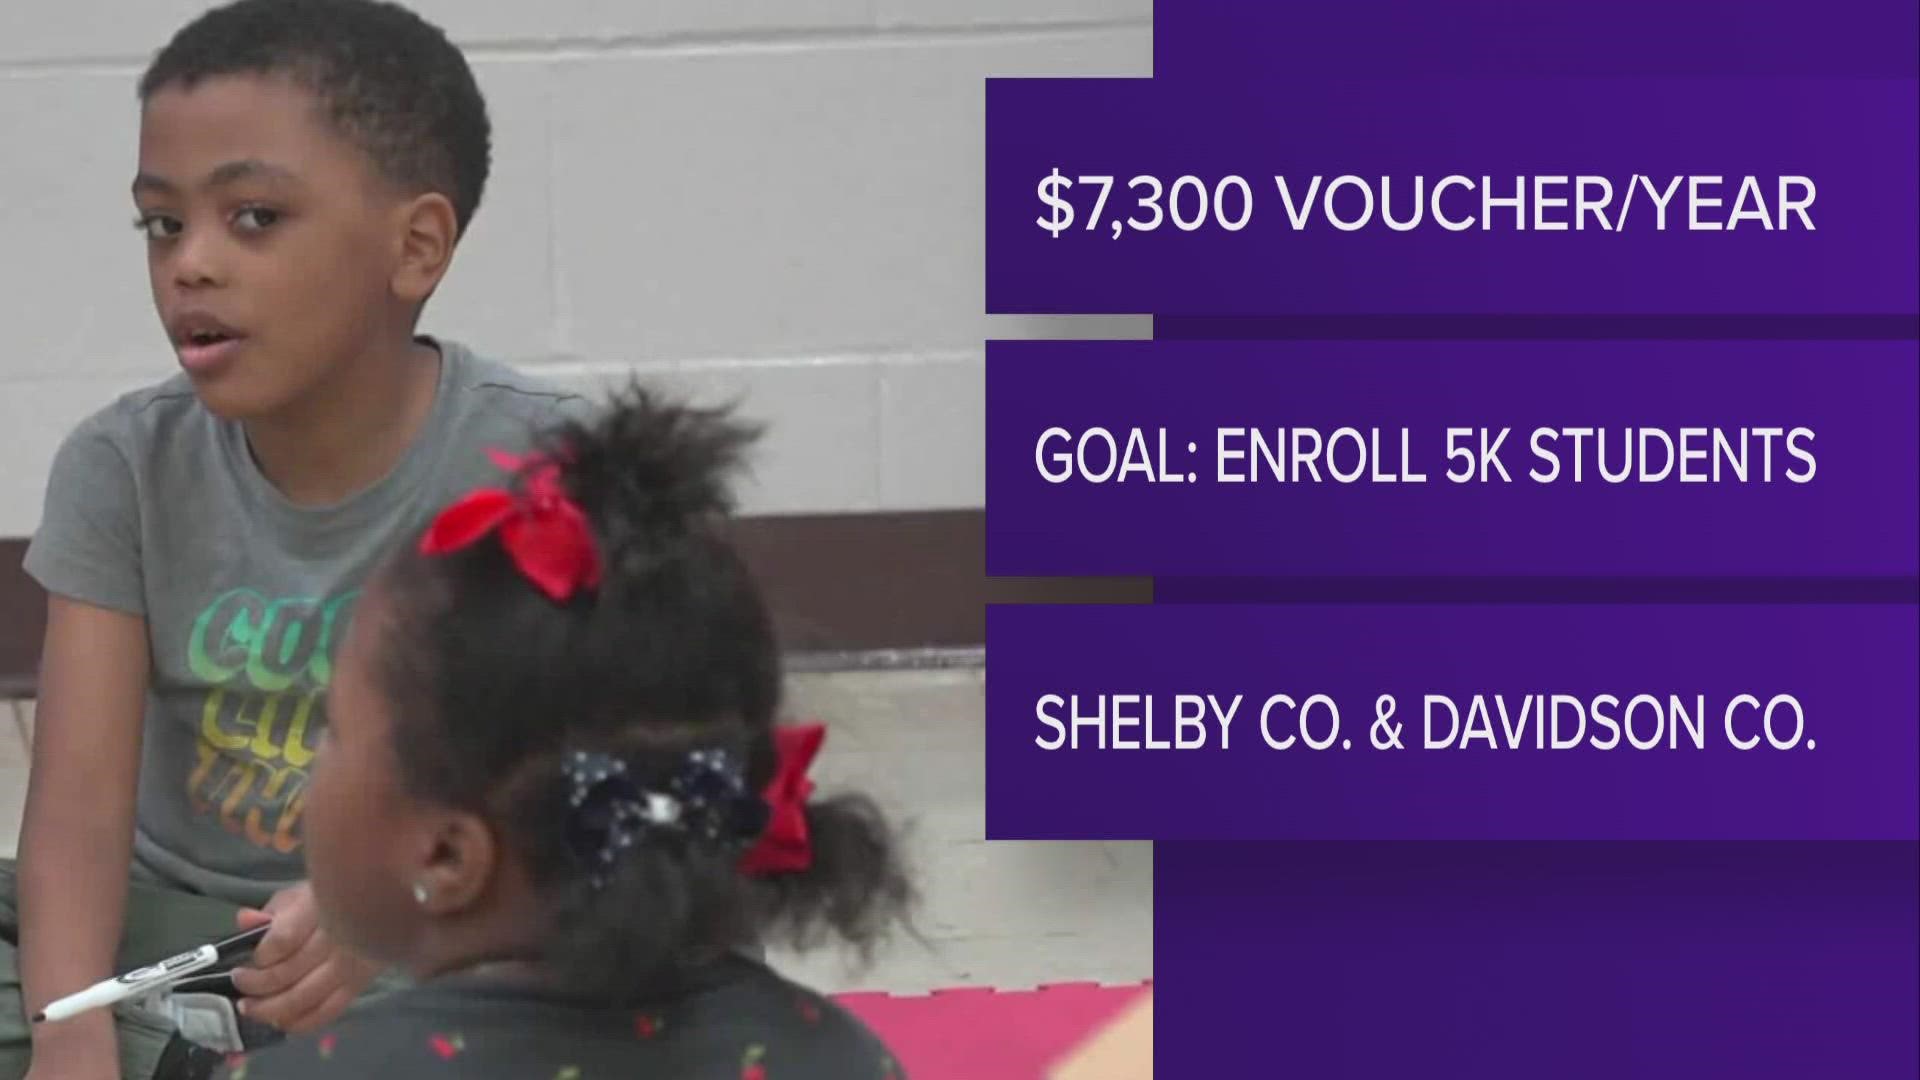 The goal is to enroll up to 5,000 students in the first year. Only students in Shelby and Davidson counties are eligible for the program.